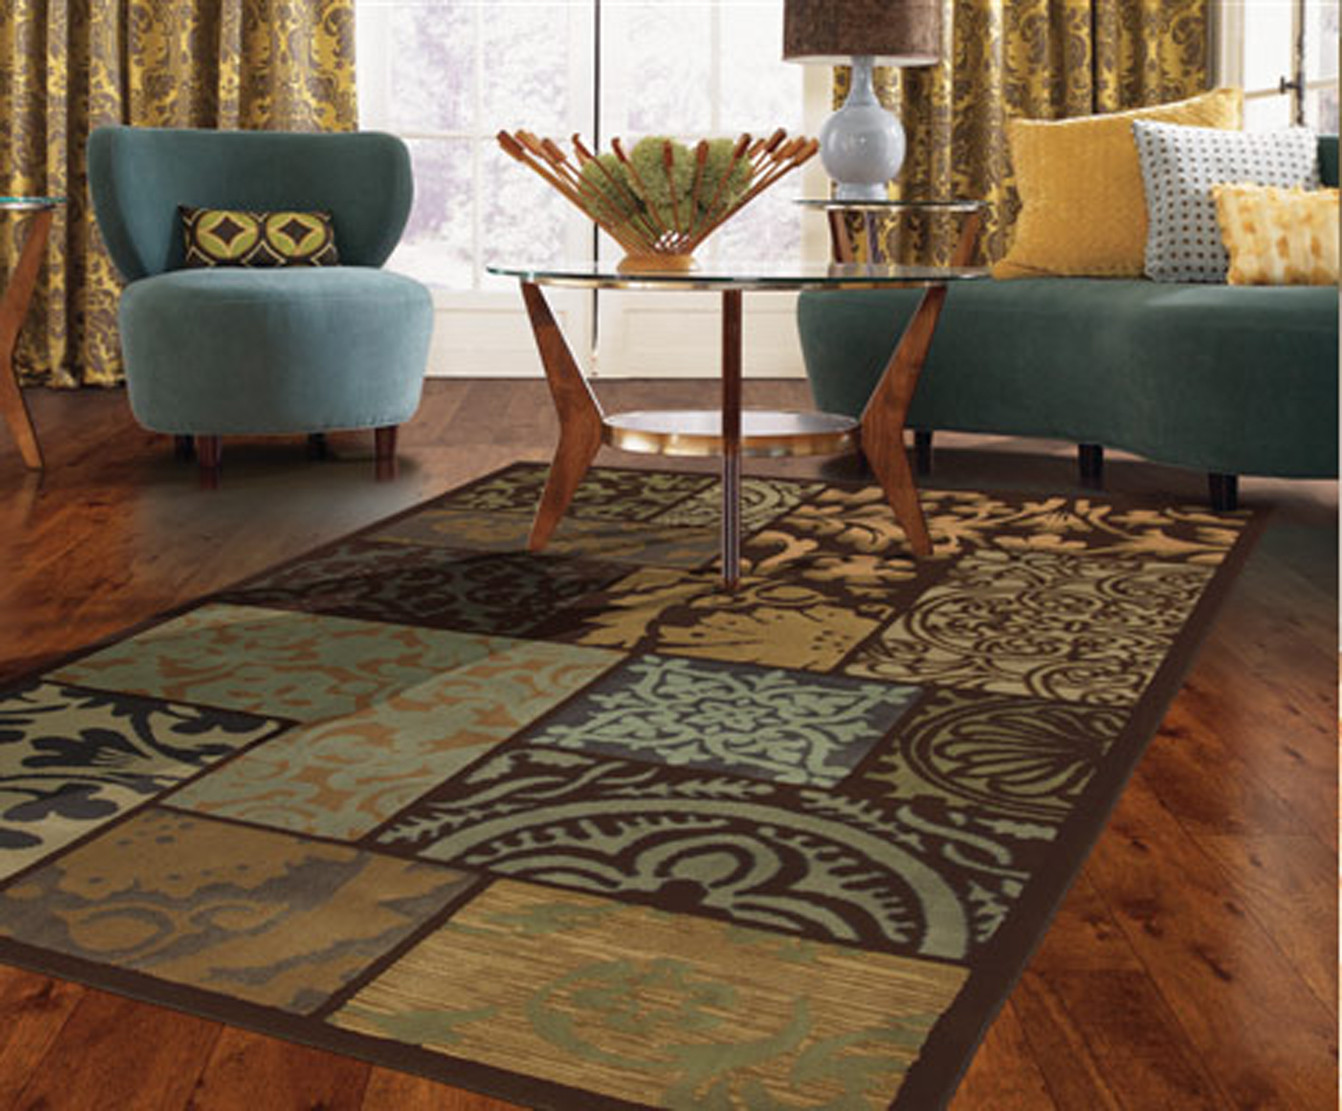 Living Room Area Rug Ideas
 Colorful Area Rugs Unique Rugs For The Living Room